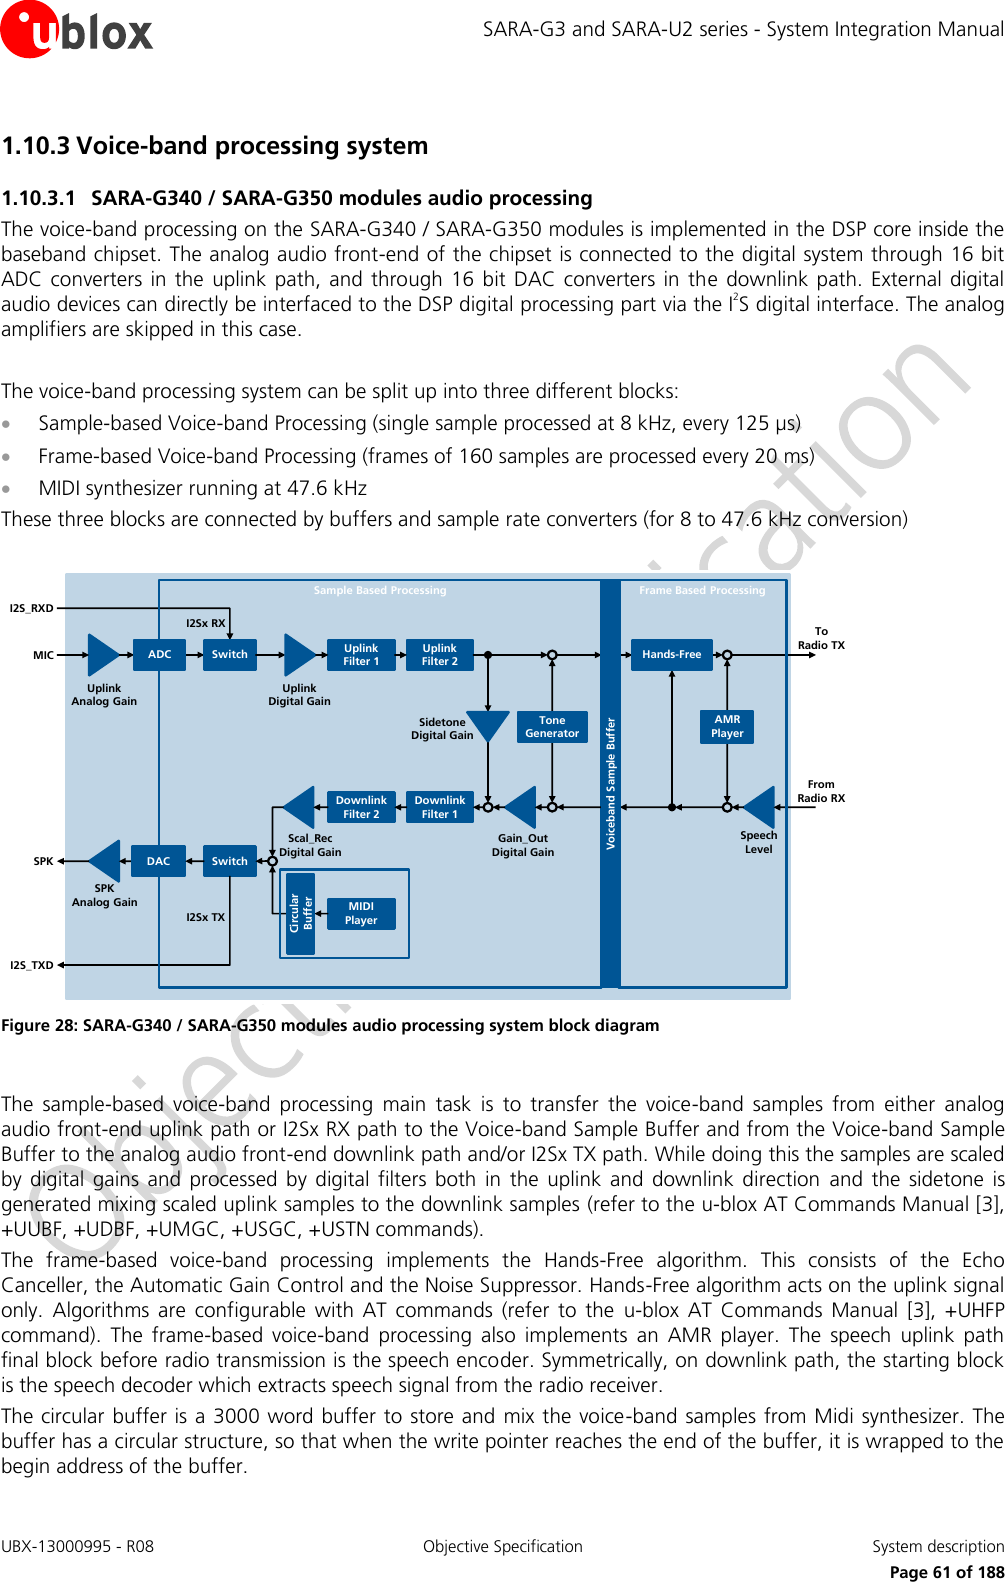 SARA-G3 and SARA-U2 series - System Integration Manual UBX-13000995 - R08  Objective Specification  System description     Page 61 of 188 1.10.3 Voice-band processing system  1.10.3.1 SARA-G340 / SARA-G350 modules audio processing The voice-band processing on the SARA-G340 / SARA-G350 modules is implemented in the DSP core inside the baseband chipset. The analog audio front-end of the chipset is connected to the digital system through 16 bit ADC converters  in the  uplink  path,  and through  16 bit DAC converters  in the  downlink path. External digital audio devices can directly be interfaced to the DSP digital processing part via the I2S digital interface. The analog amplifiers are skipped in this case.  The voice-band processing system can be split up into three different blocks:  Sample-based Voice-band Processing (single sample processed at 8 kHz, every 125 µs)  Frame-based Voice-band Processing (frames of 160 samples are processed every 20 ms)  MIDI synthesizer running at 47.6 kHz These three blocks are connected by buffers and sample rate converters (for 8 to 47.6 kHz conversion)  I2S_RXDSwitchMIC Uplink Analog GainUplink Filter 2Uplink Filter 1To    Radio TXUplinkDigital GainDownlink Filter 1Downlink Filter 2MIDI PlayerSPK SwitchI2Sx TXI2S_TXDScal_Rec Digital GainSPK         Analog GainGain_Out Digital GainFrom Radio RXSpeech LevelI2Sx RXSample Based Processing Frame Based ProcessingCircular BufferSidetone Digital GainDACADCTone GeneratorAMR PlayerHands-FreeVoiceband Sample Buffer Figure 28: SARA-G340 / SARA-G350 modules audio processing system block diagram  The  sample-based  voice-band  processing  main  task  is  to  transfer  the  voice-band  samples  from  either  analog audio front-end uplink path or I2Sx RX path to the Voice-band Sample Buffer and from the Voice-band Sample Buffer to the analog audio front-end downlink path and/or I2Sx TX path. While doing this the samples are scaled by  digital  gains  and  processed  by  digital  filters  both  in  the  uplink  and  downlink  direction  and  the  sidetone is generated mixing scaled uplink samples to the downlink samples (refer to the u-blox AT Commands Manual [3], +UUBF, +UDBF, +UMGC, +USGC, +USTN commands). The  frame-based  voice-band  processing  implements  the  Hands-Free  algorithm.  This  consists  of  the  Echo Canceller, the Automatic Gain Control and the Noise Suppressor. Hands-Free algorithm acts on the uplink signal only.  Algorithms  are  configurable  with  AT  commands  (refer  to  the  u-blox  AT  Commands  Manual [3],  +UHFP command).  The  frame-based  voice-band  processing  also  implements  an  AMR  player.  The  speech  uplink  path final block before radio transmission is the speech encoder. Symmetrically, on downlink path, the starting block is the speech decoder which extracts speech signal from the radio receiver. The circular buffer is a 3000 word buffer to store and  mix the voice-band samples from Midi synthesizer. The buffer has a circular structure, so that when the write pointer reaches the end of the buffer, it is wrapped to the begin address of the buffer. 